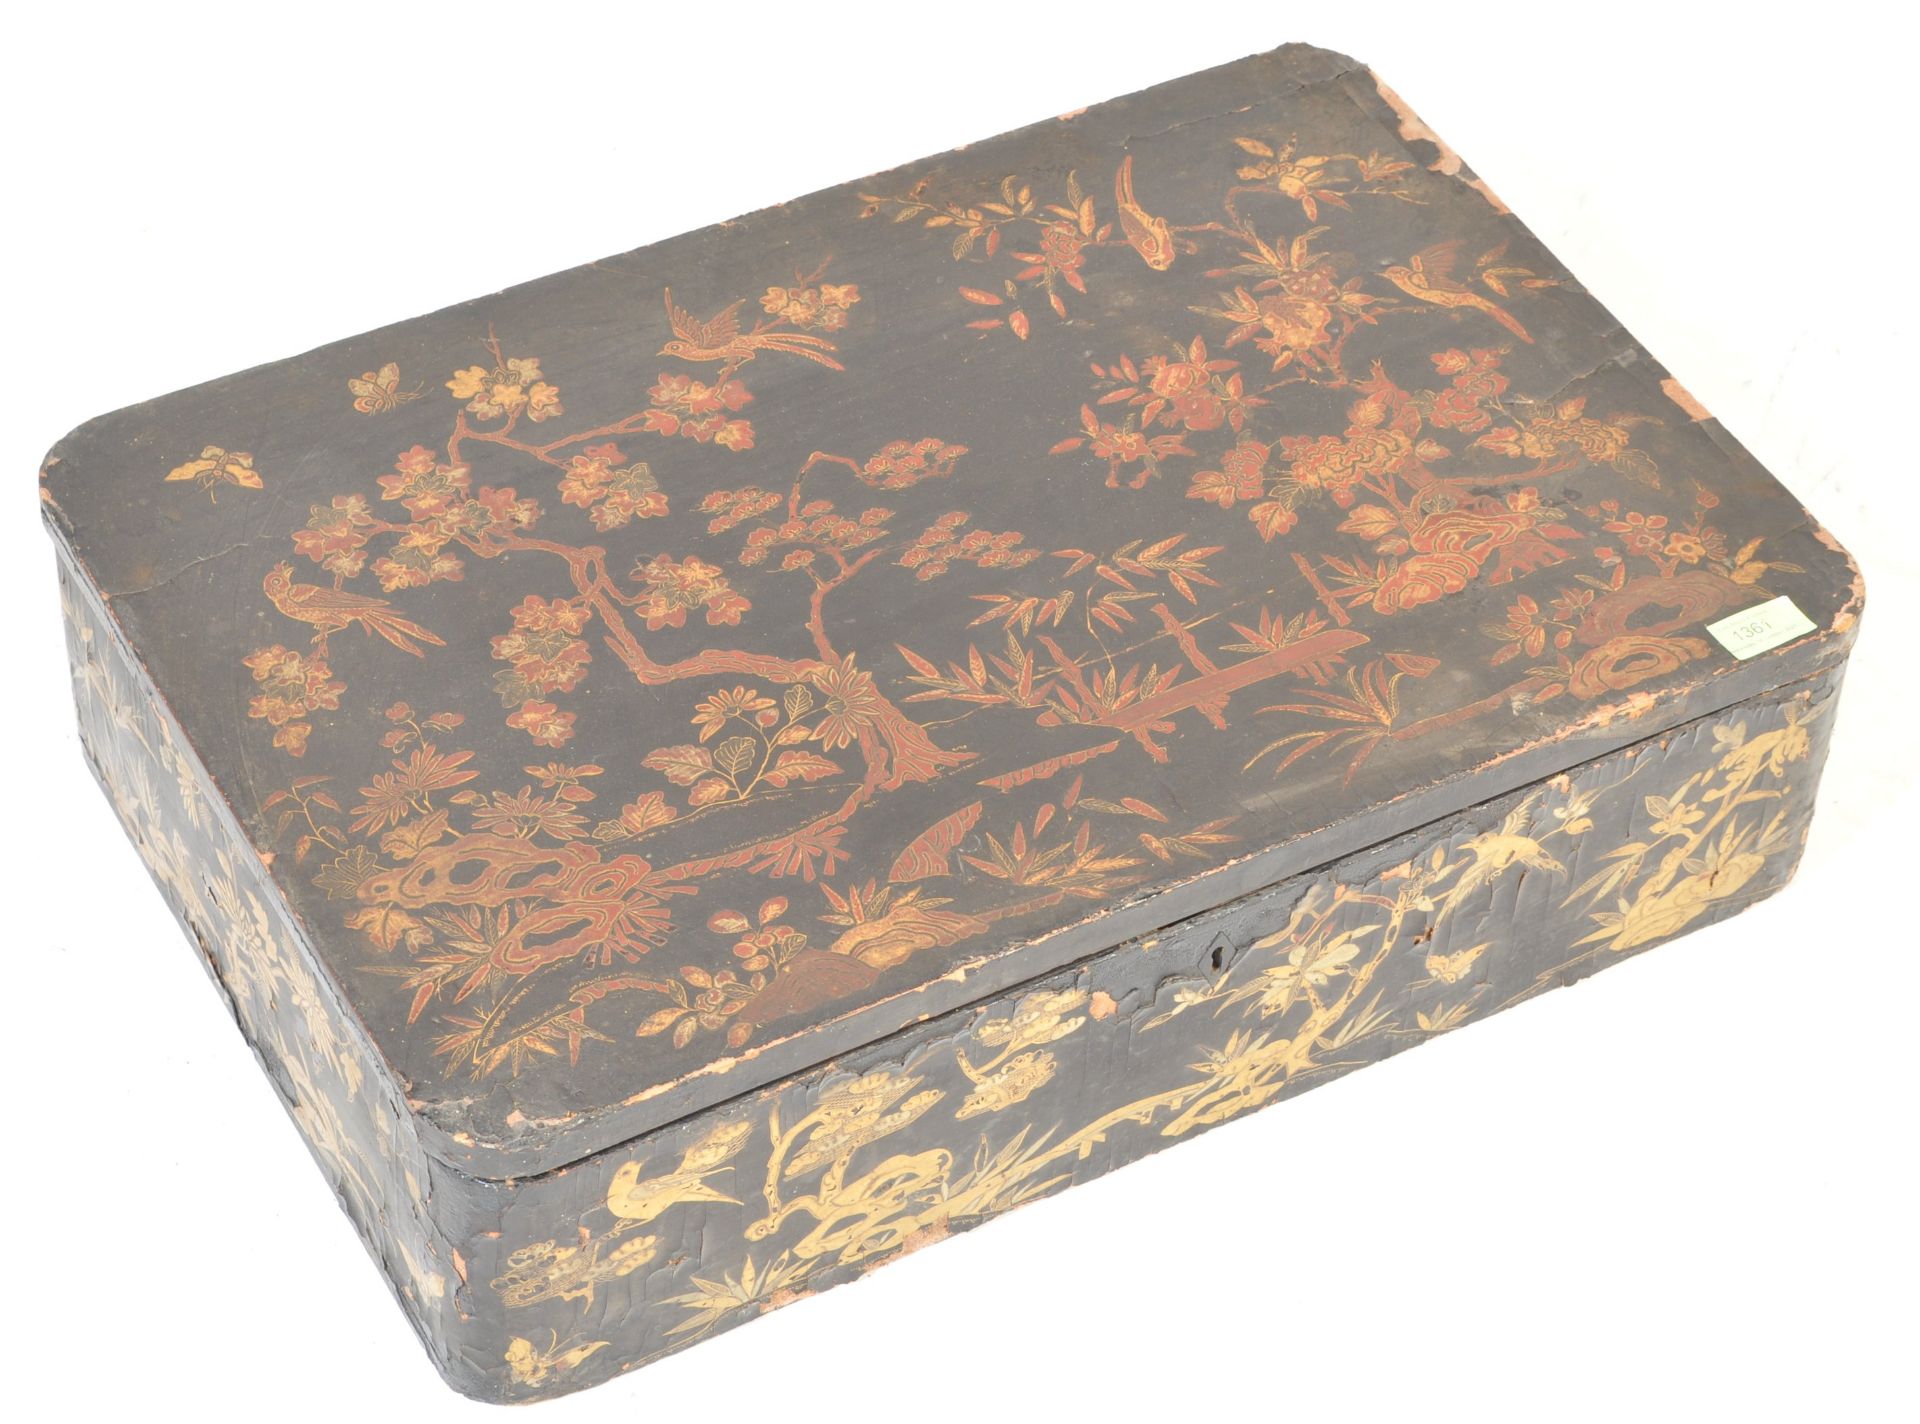 20TH CENTURY CHINESE ORIENTAL BLACK LACQUER BOX